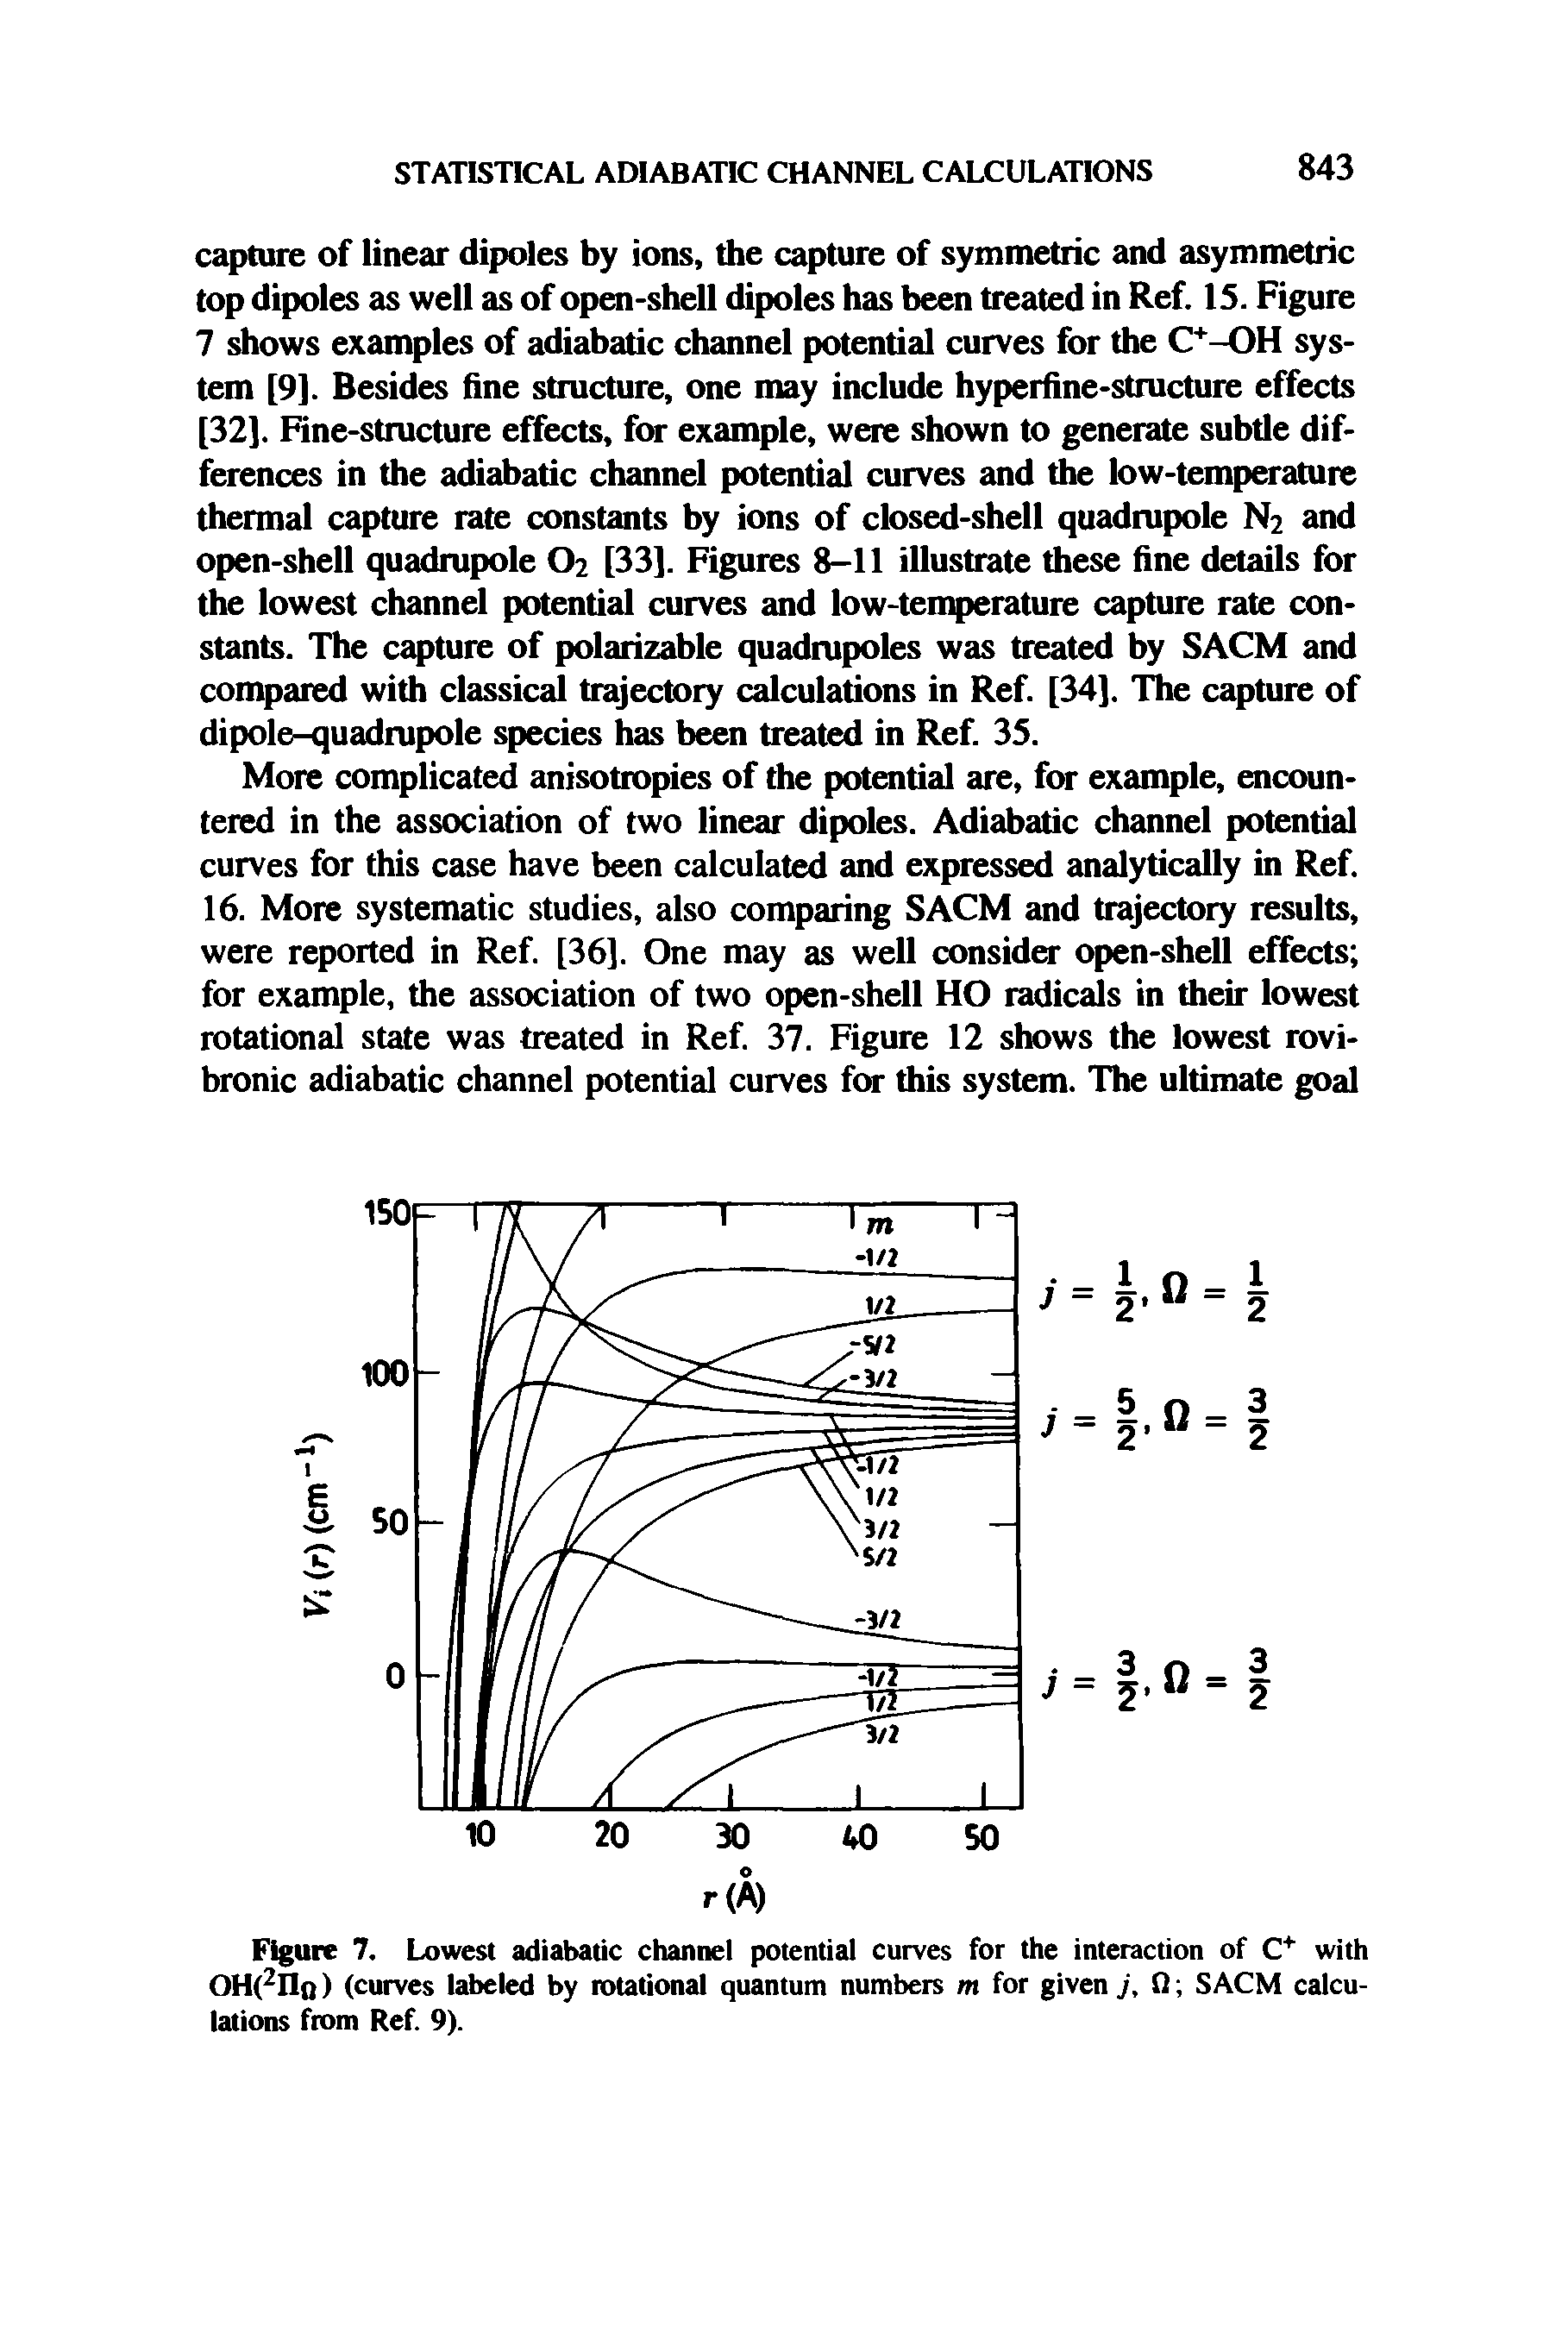 Figure 7. Lowest adiabatic channel potential curves for the interaction of C+ with OH(2I1q ) (curves labeled by rotational quantum numbers m for given j, II SACM calculations from Ref. 9).